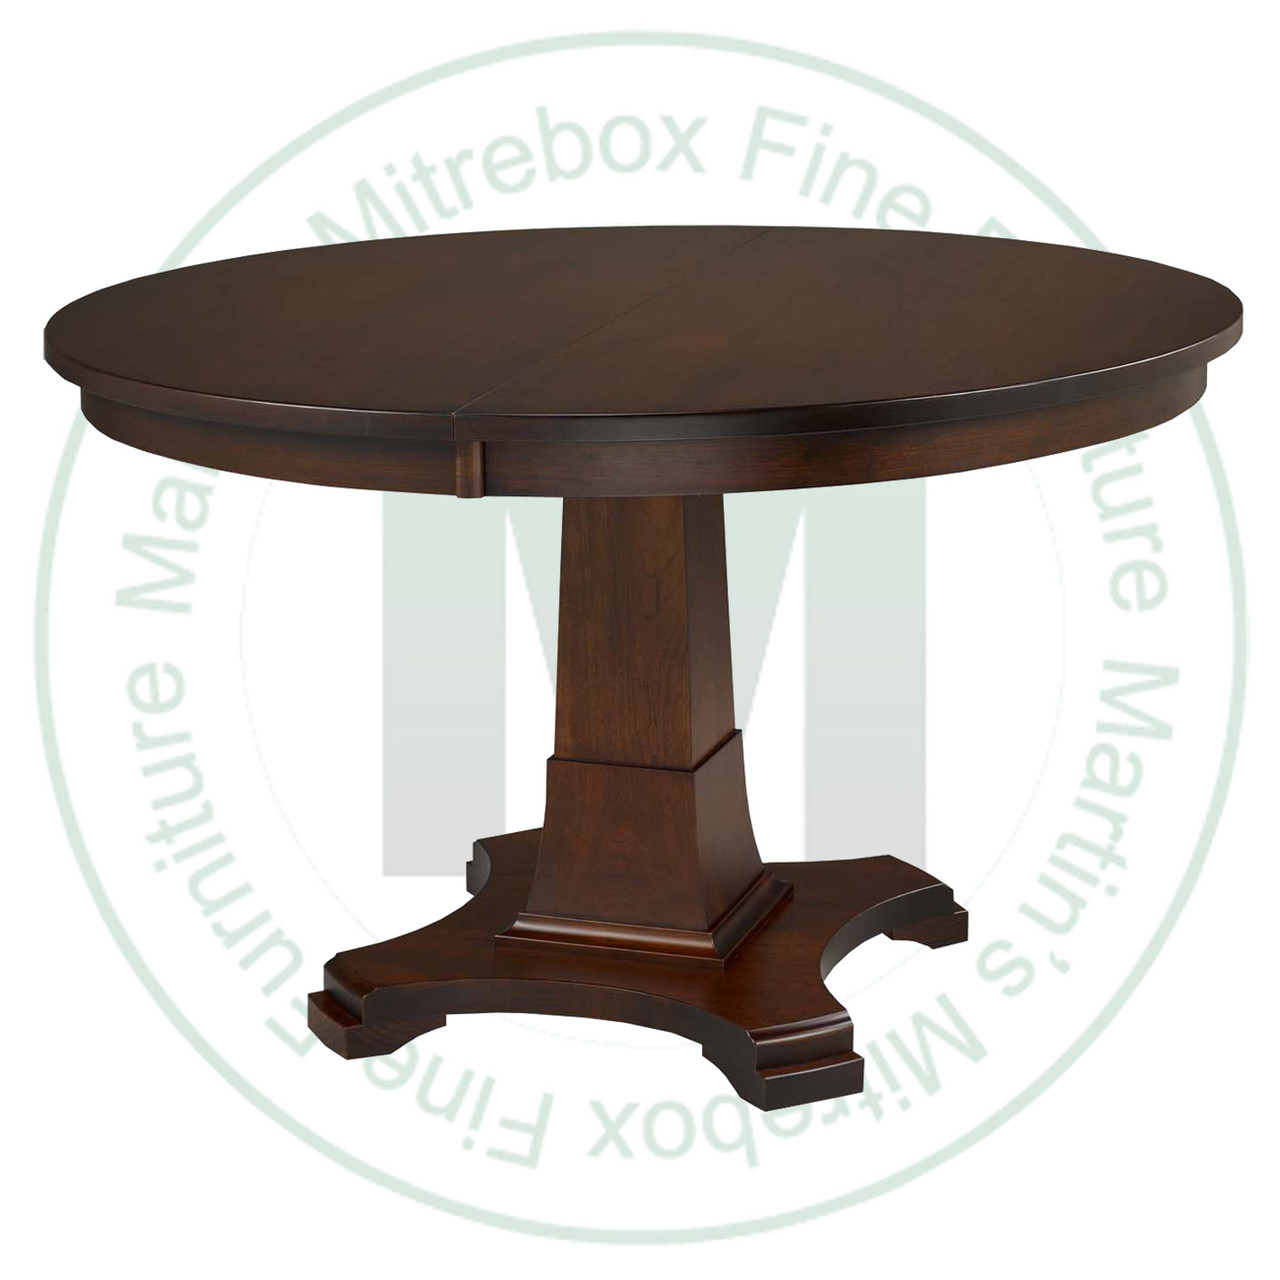 Oak Abbey Single Pedestal Table 54''D x 54''W x 30''H With 2 - 12'' Leaves. Table Has 1.25'' Thick Top